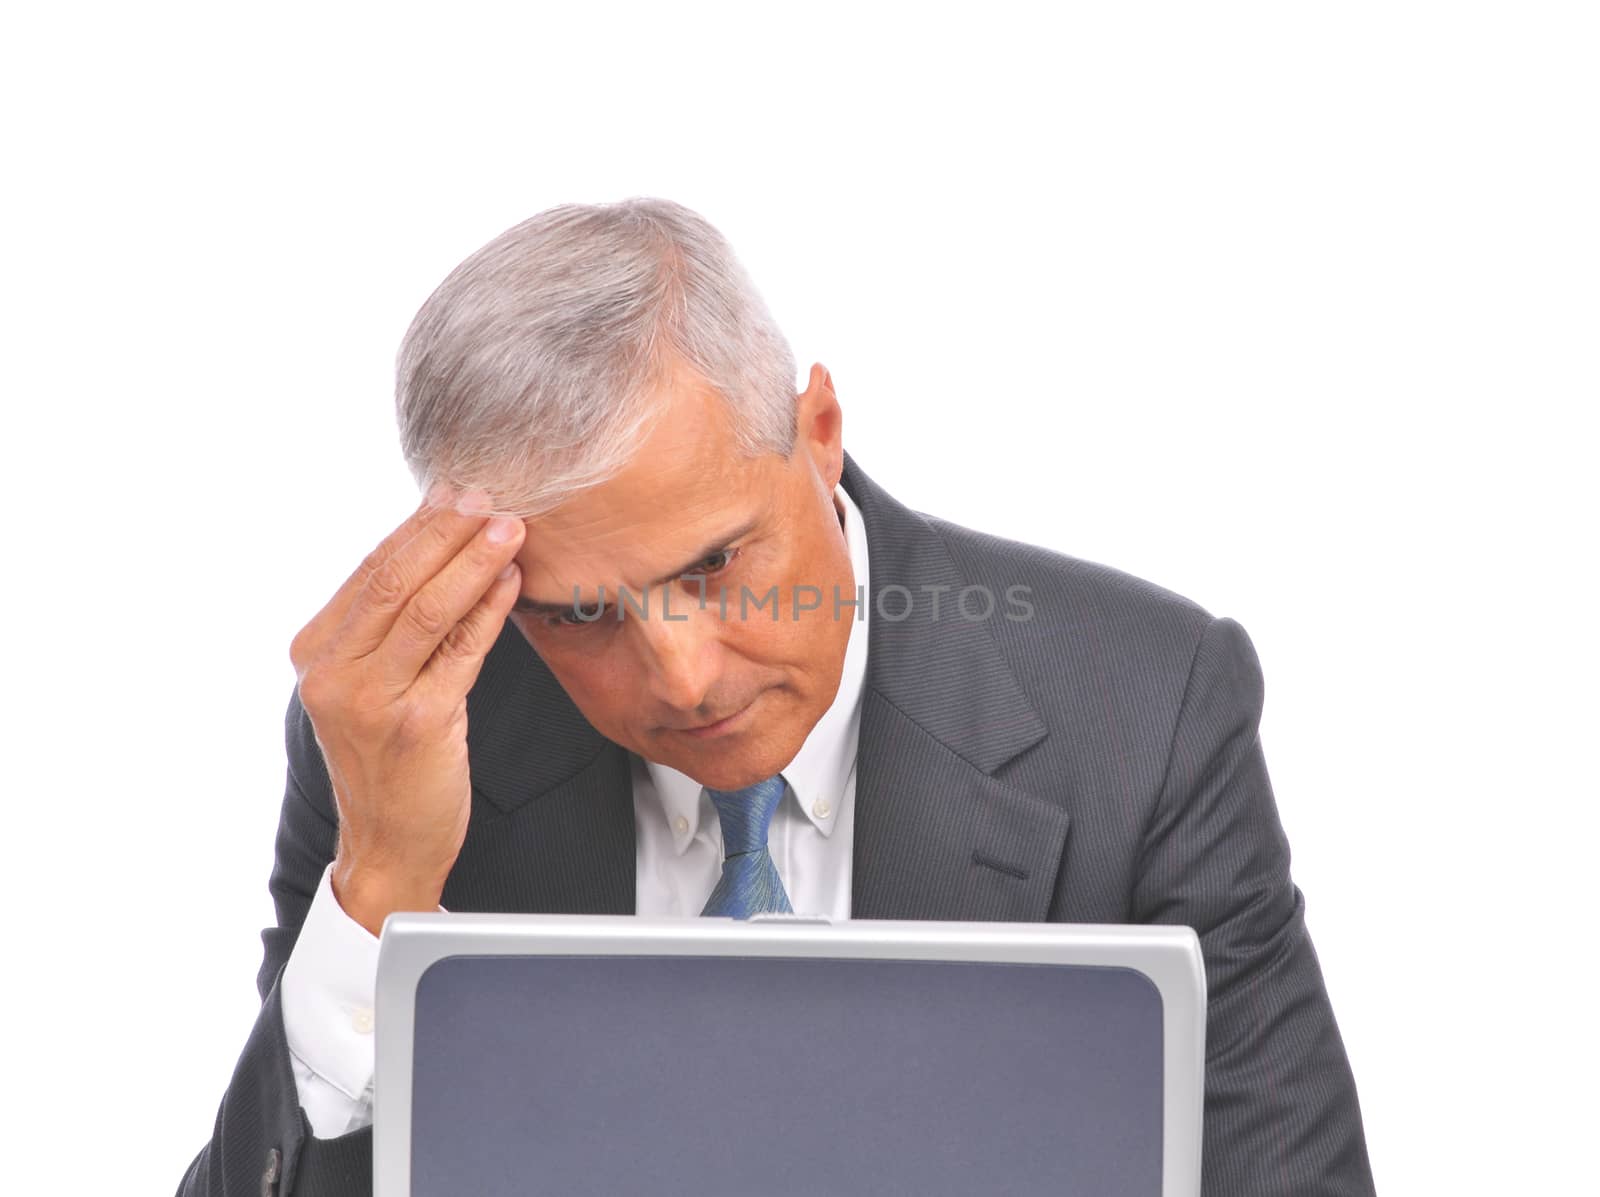 Businessman seated looking over top of laptop by sCukrov